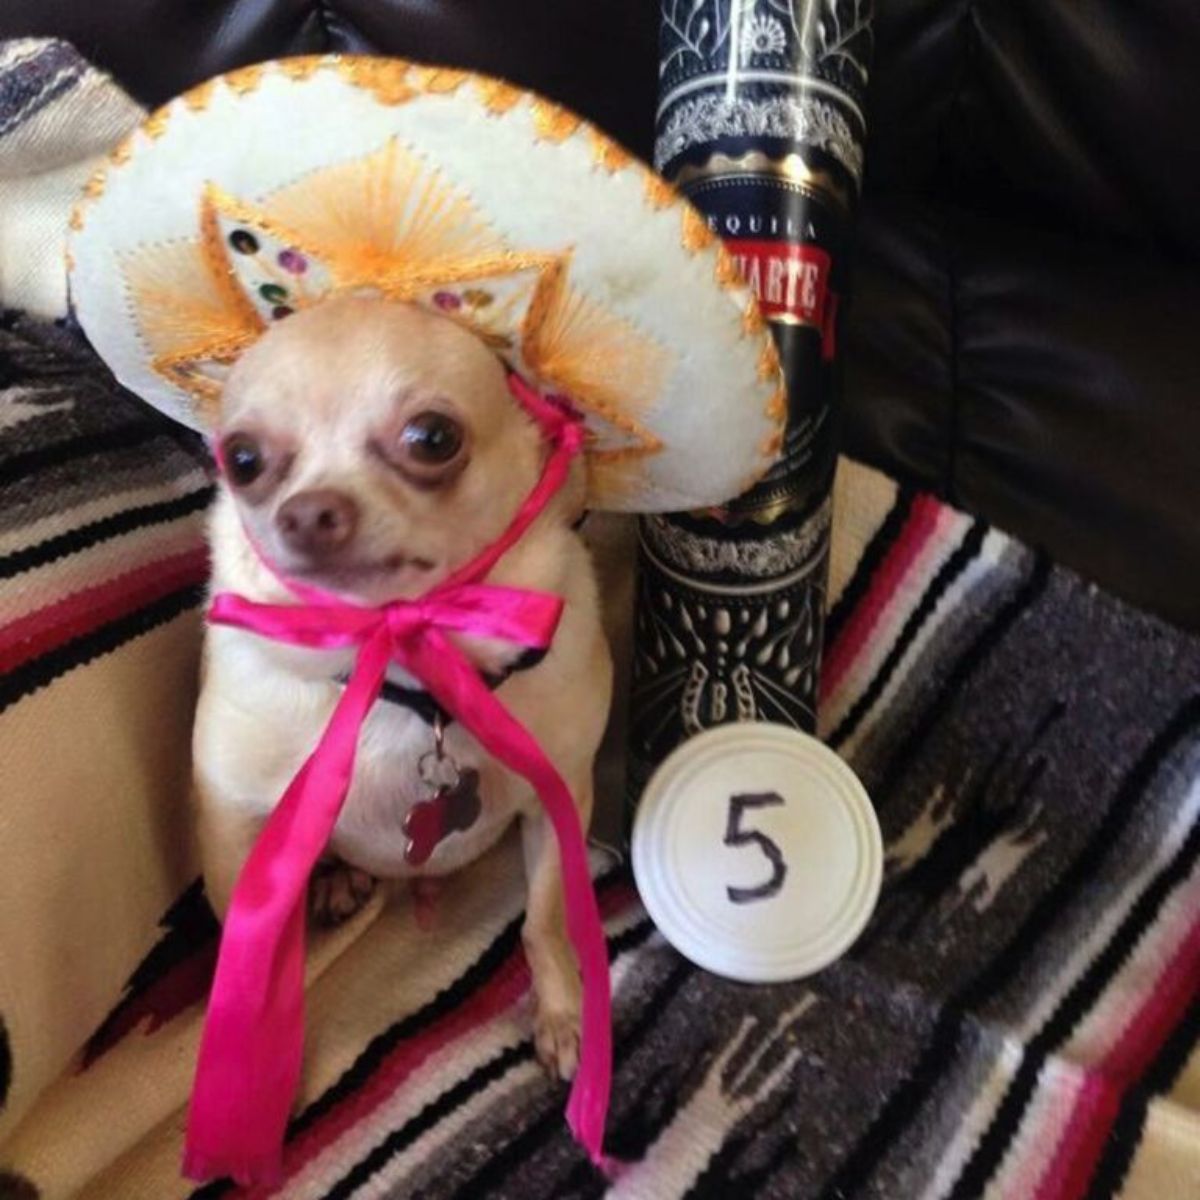 brown chihuahua wearing a white and yellow hat with a pink bow tied under the chin sitting on a colourful blanket next to a bottle of tequila